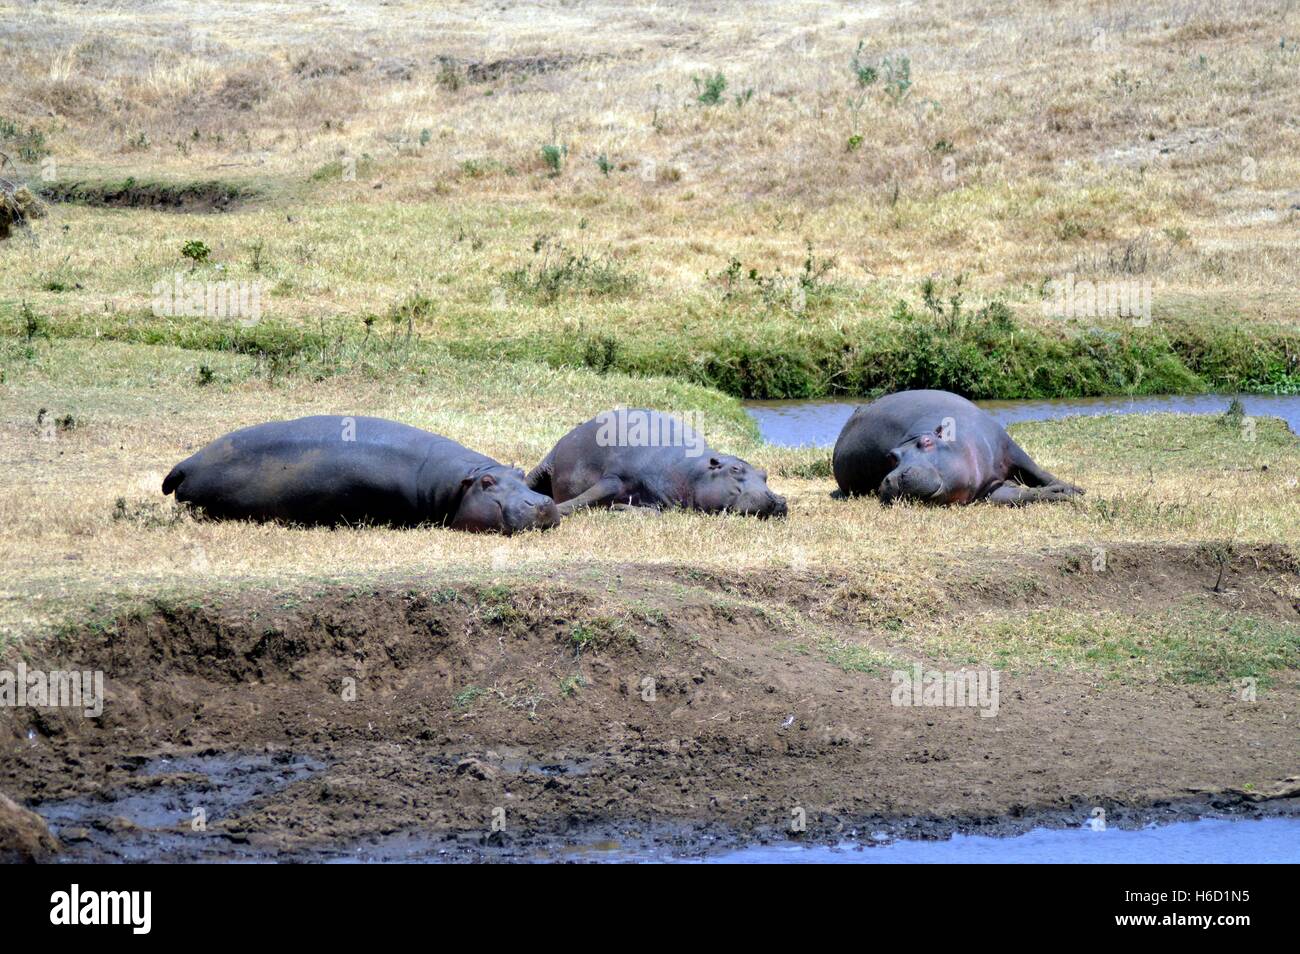 Three Hippo napping on the edge of a pond in a park in Tanzania Stock Photo